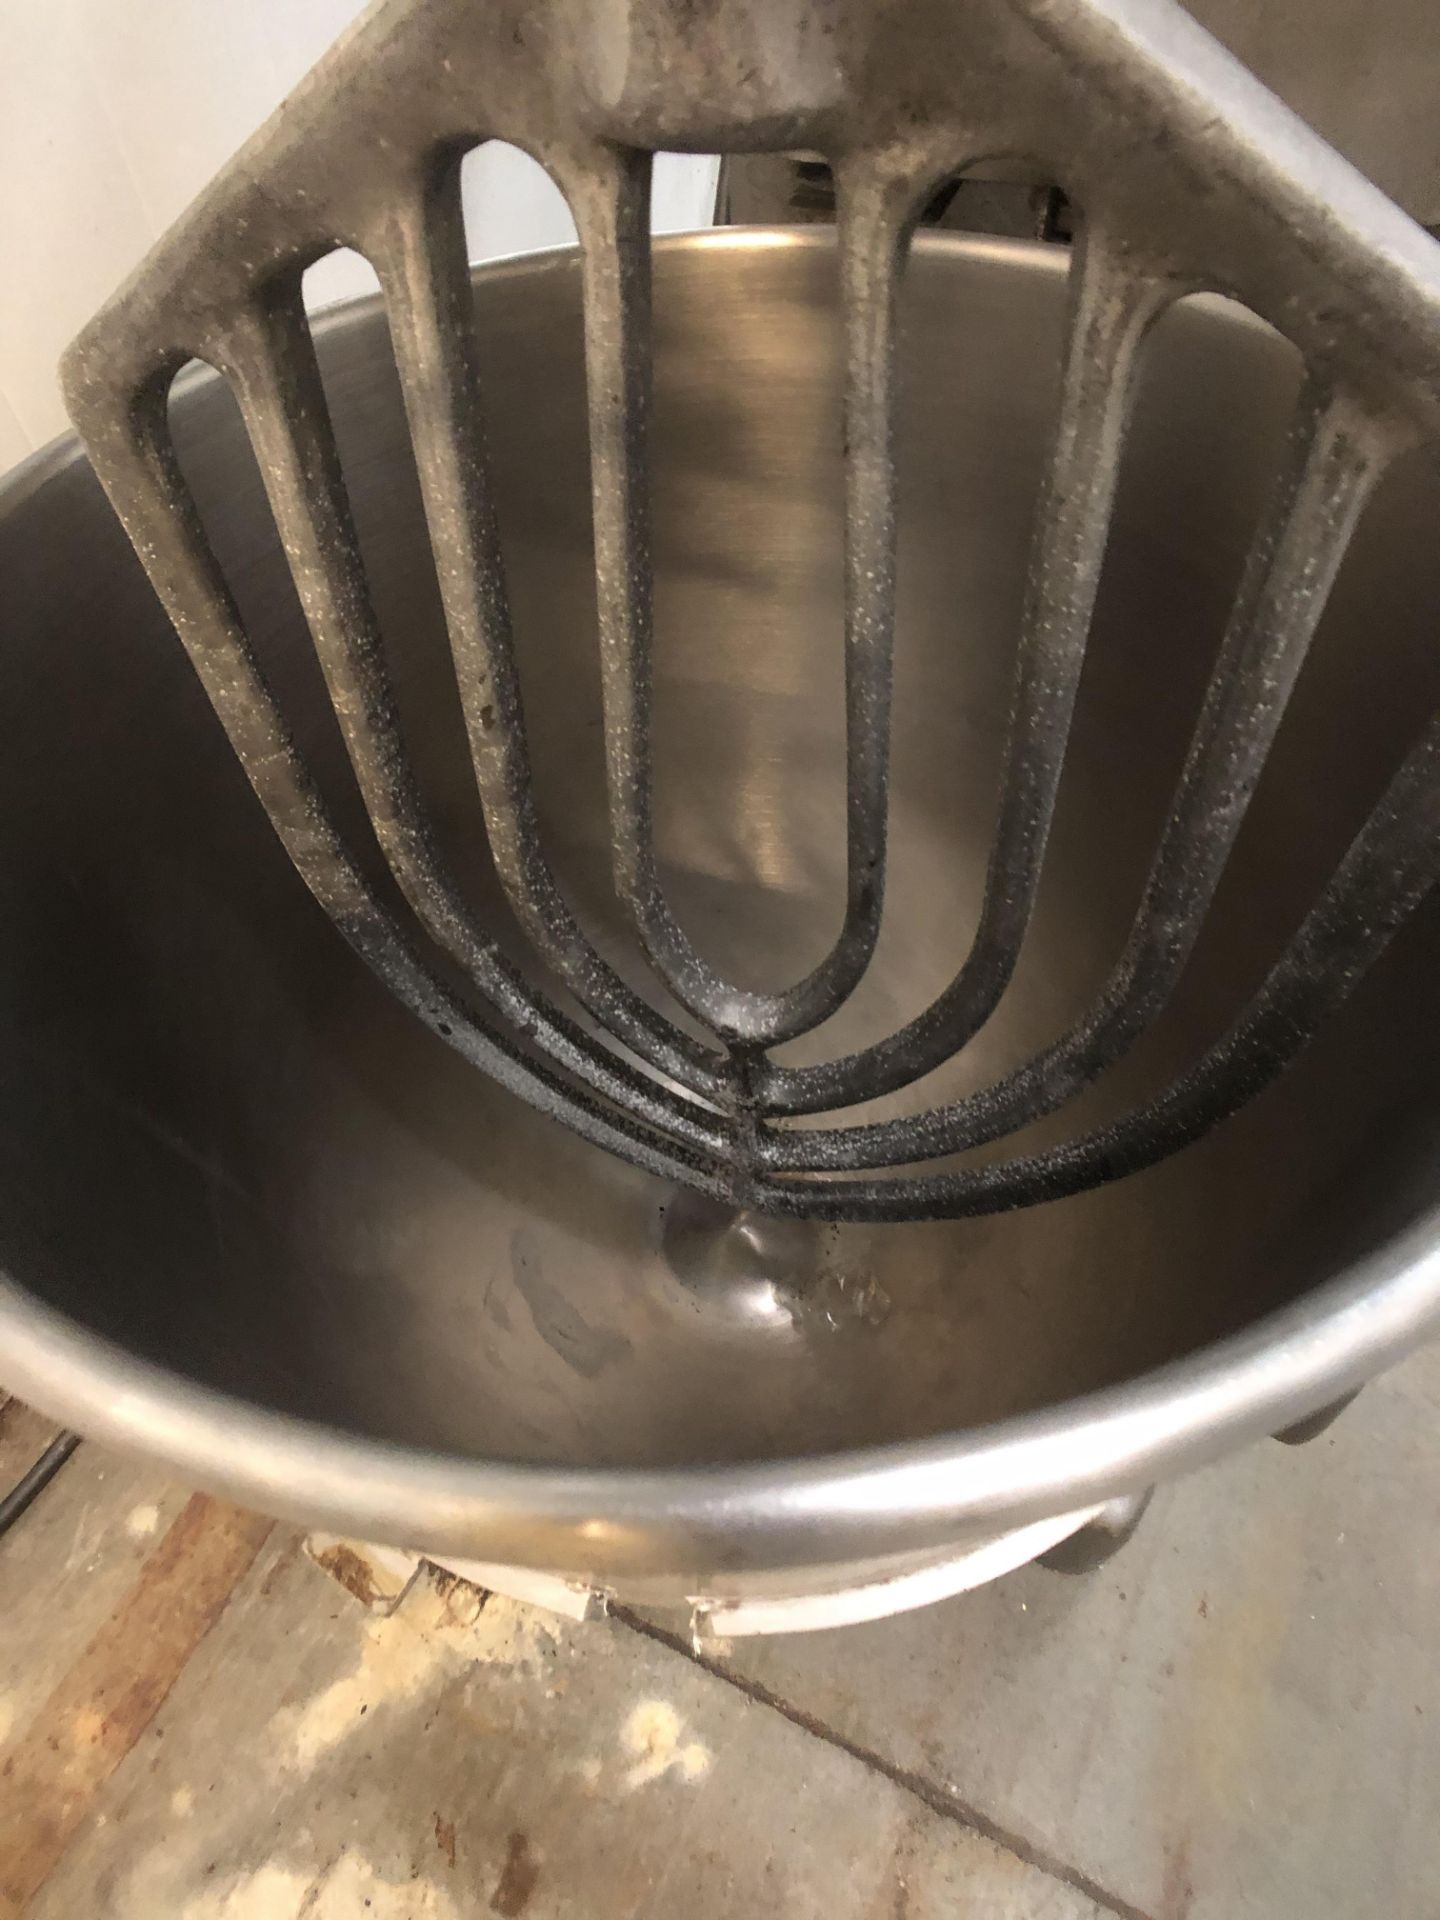 HOBART MIXER MODEL V1401 W/ BOWL 140 Qt. AND BEATER ATTACHMENT - Image 4 of 8